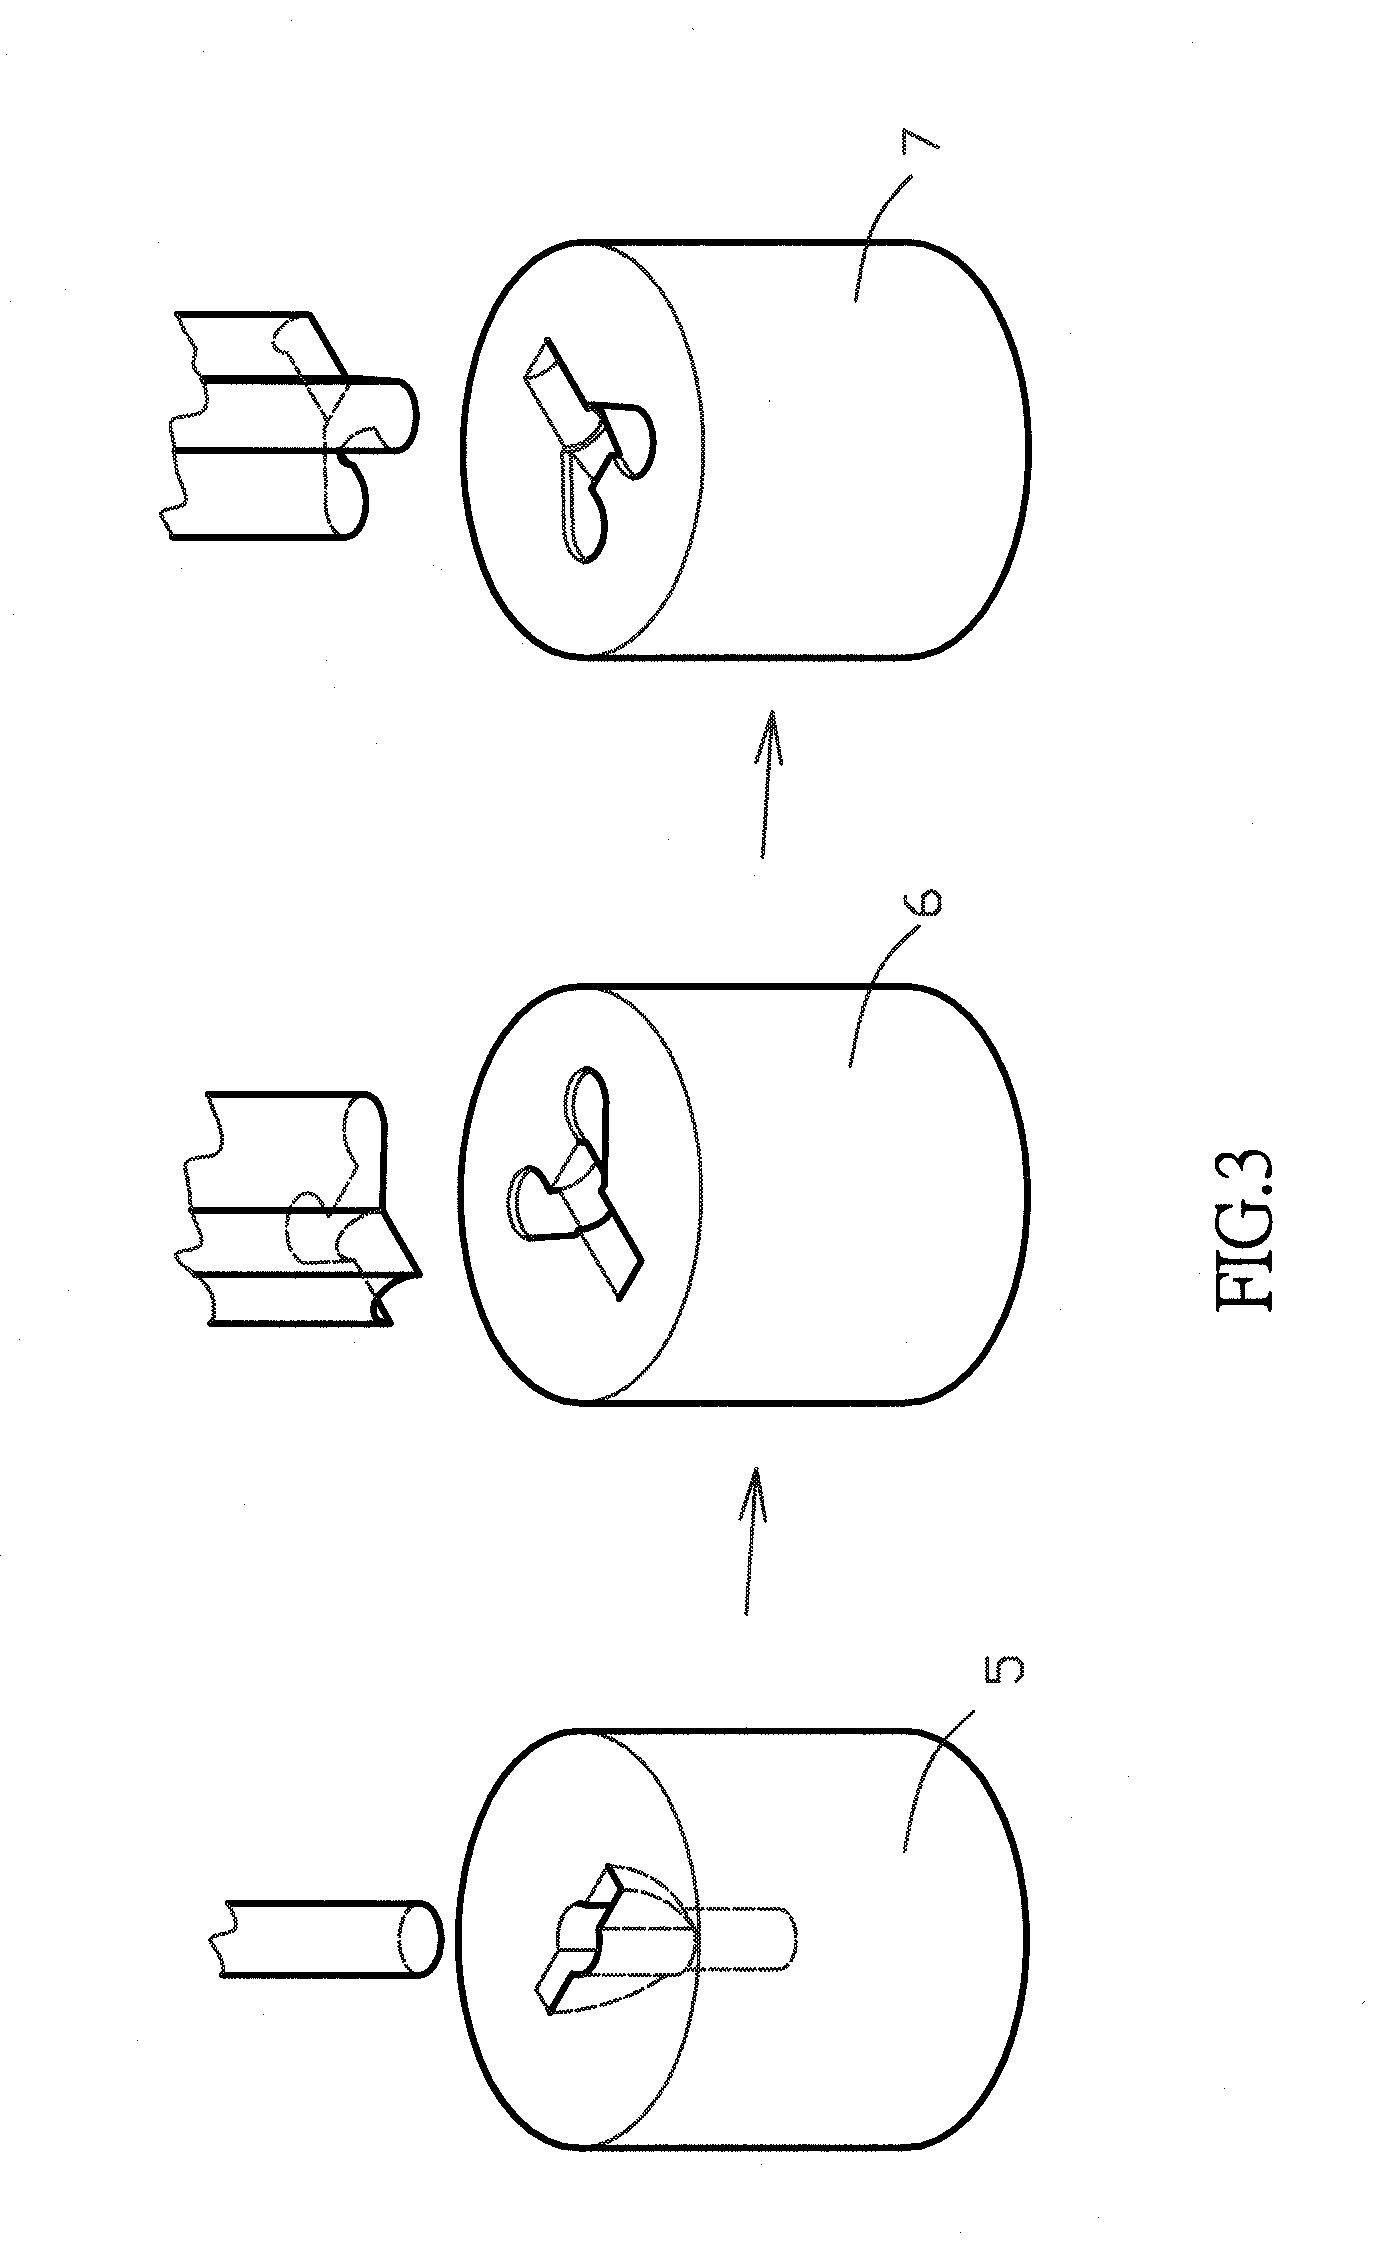 Method for manufacturing cold-forged wing bolts